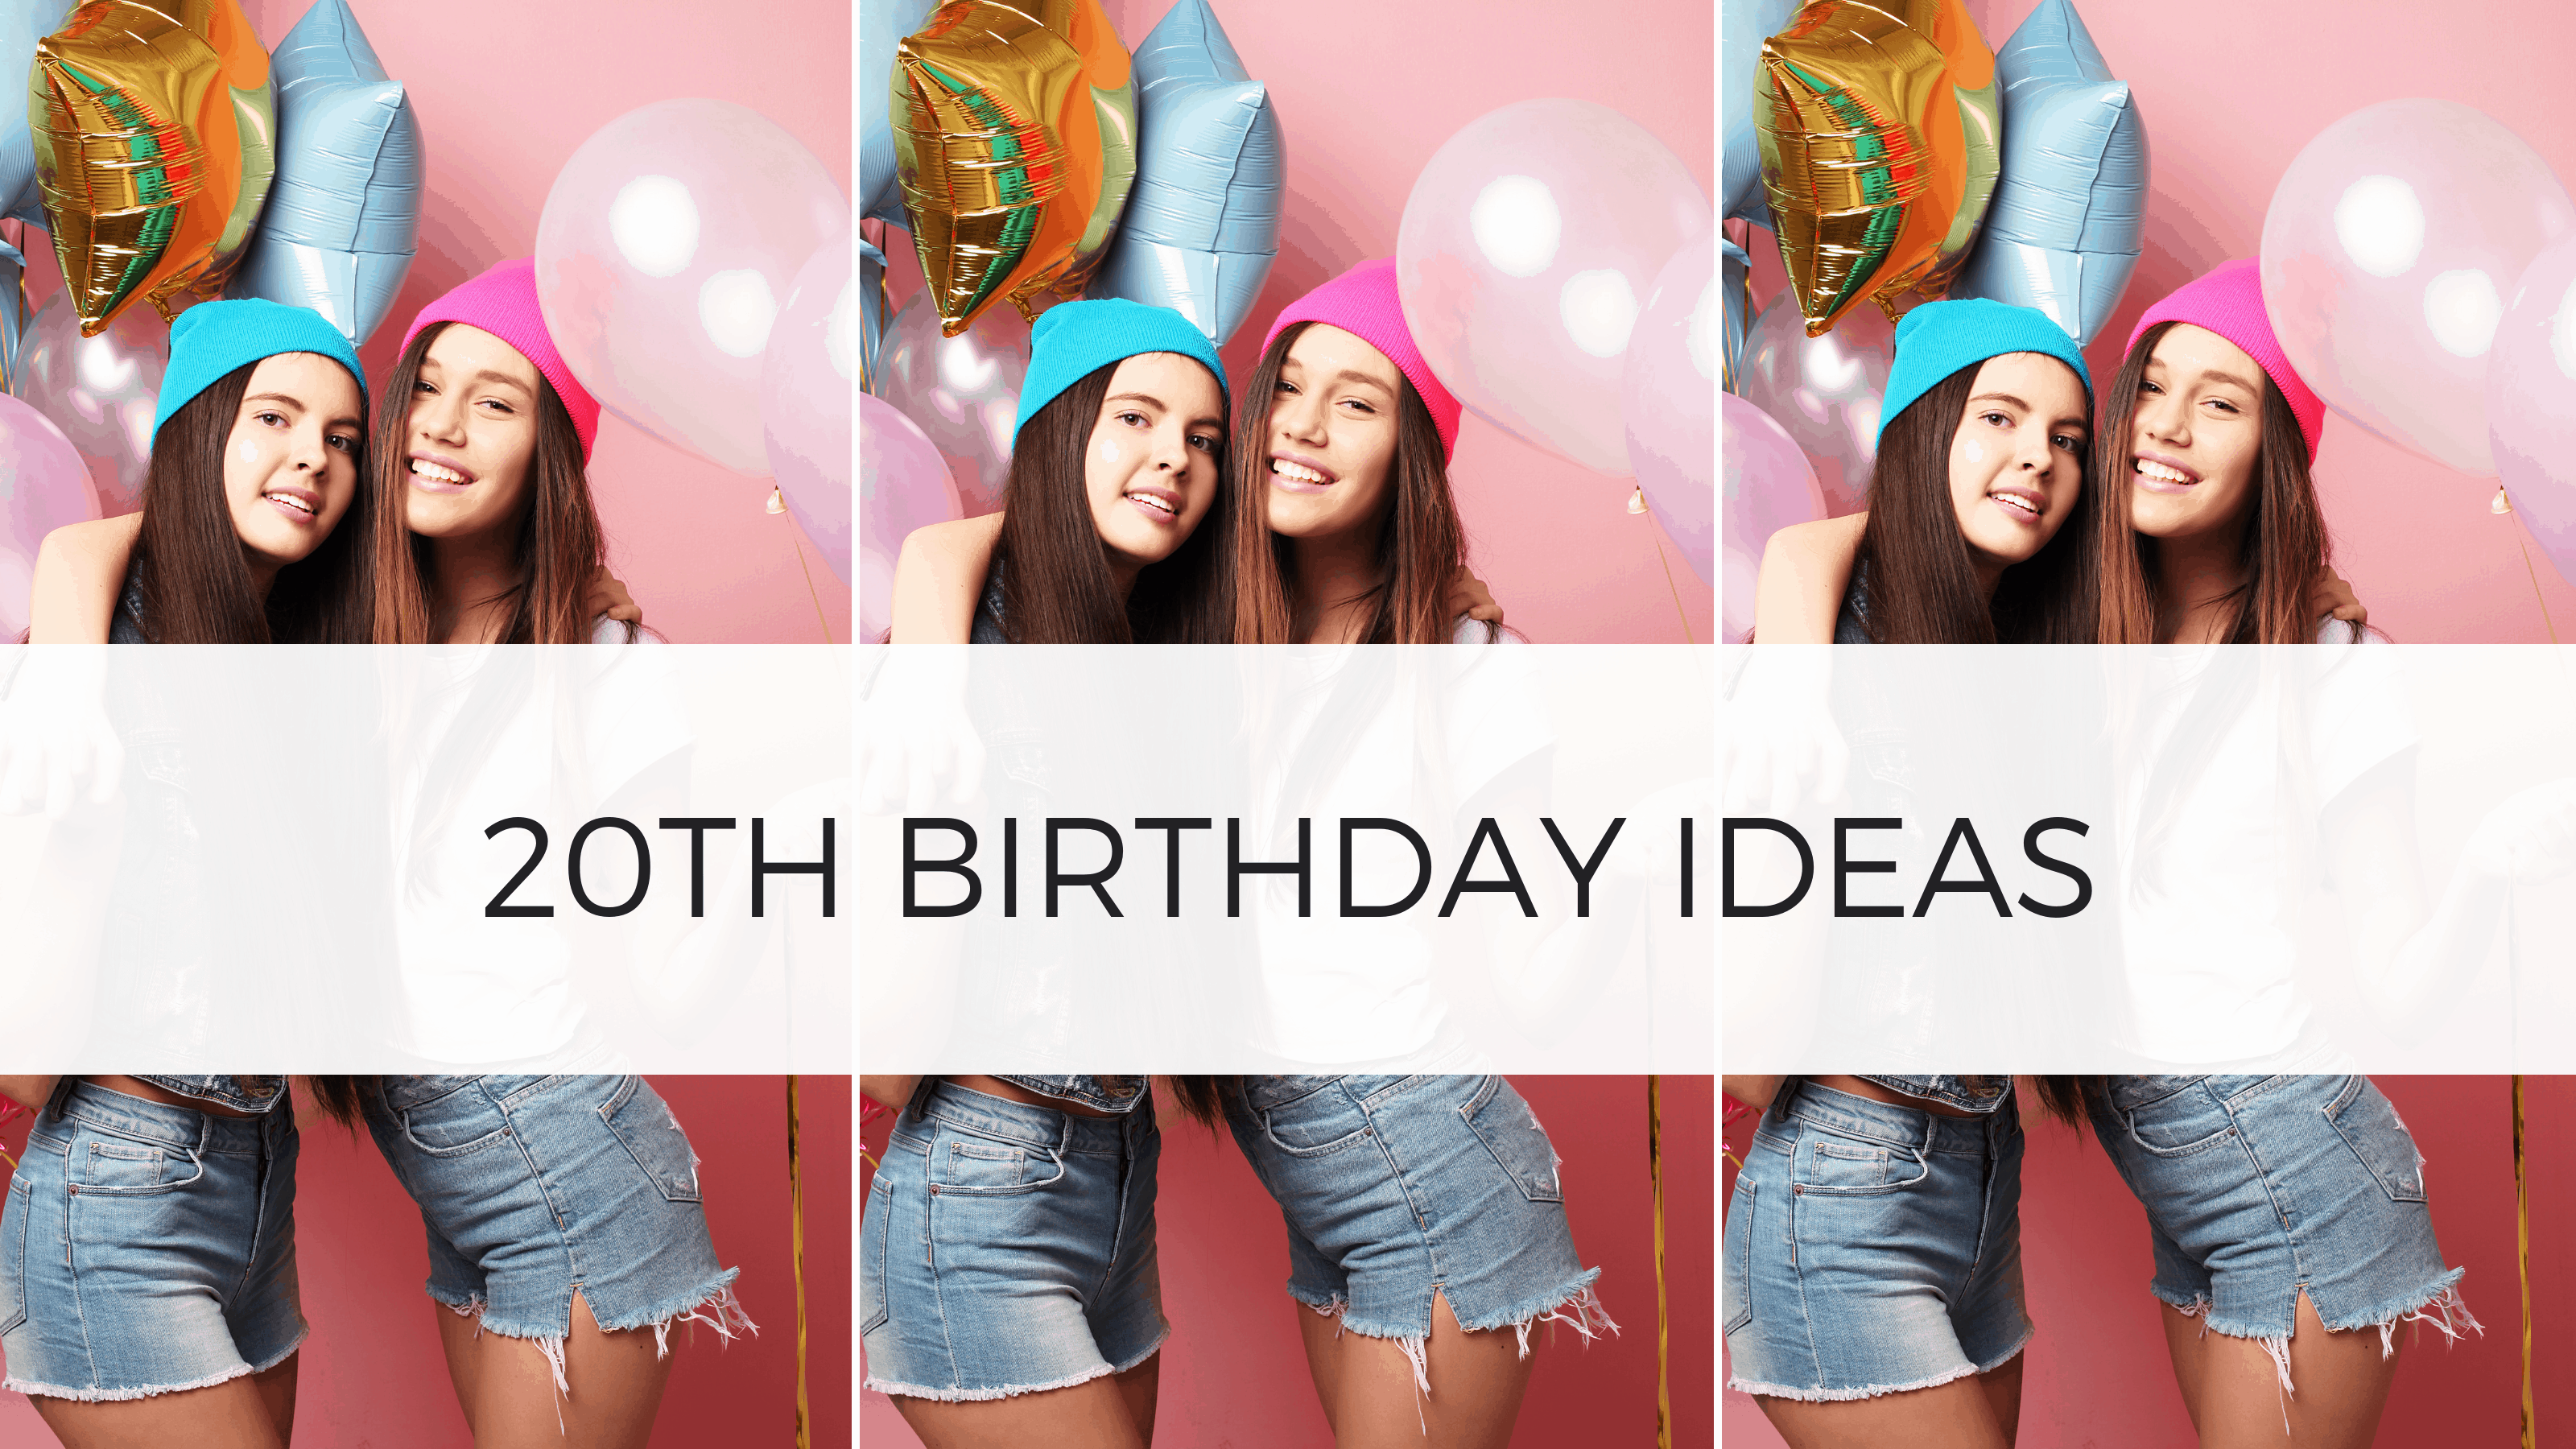 Birthday gift ideas for 20 year old female college student Best 20th Birthday Ideas 35 Insanely Fun 20th Birthday Ideas For The Best Day Ever By Sophia Lee